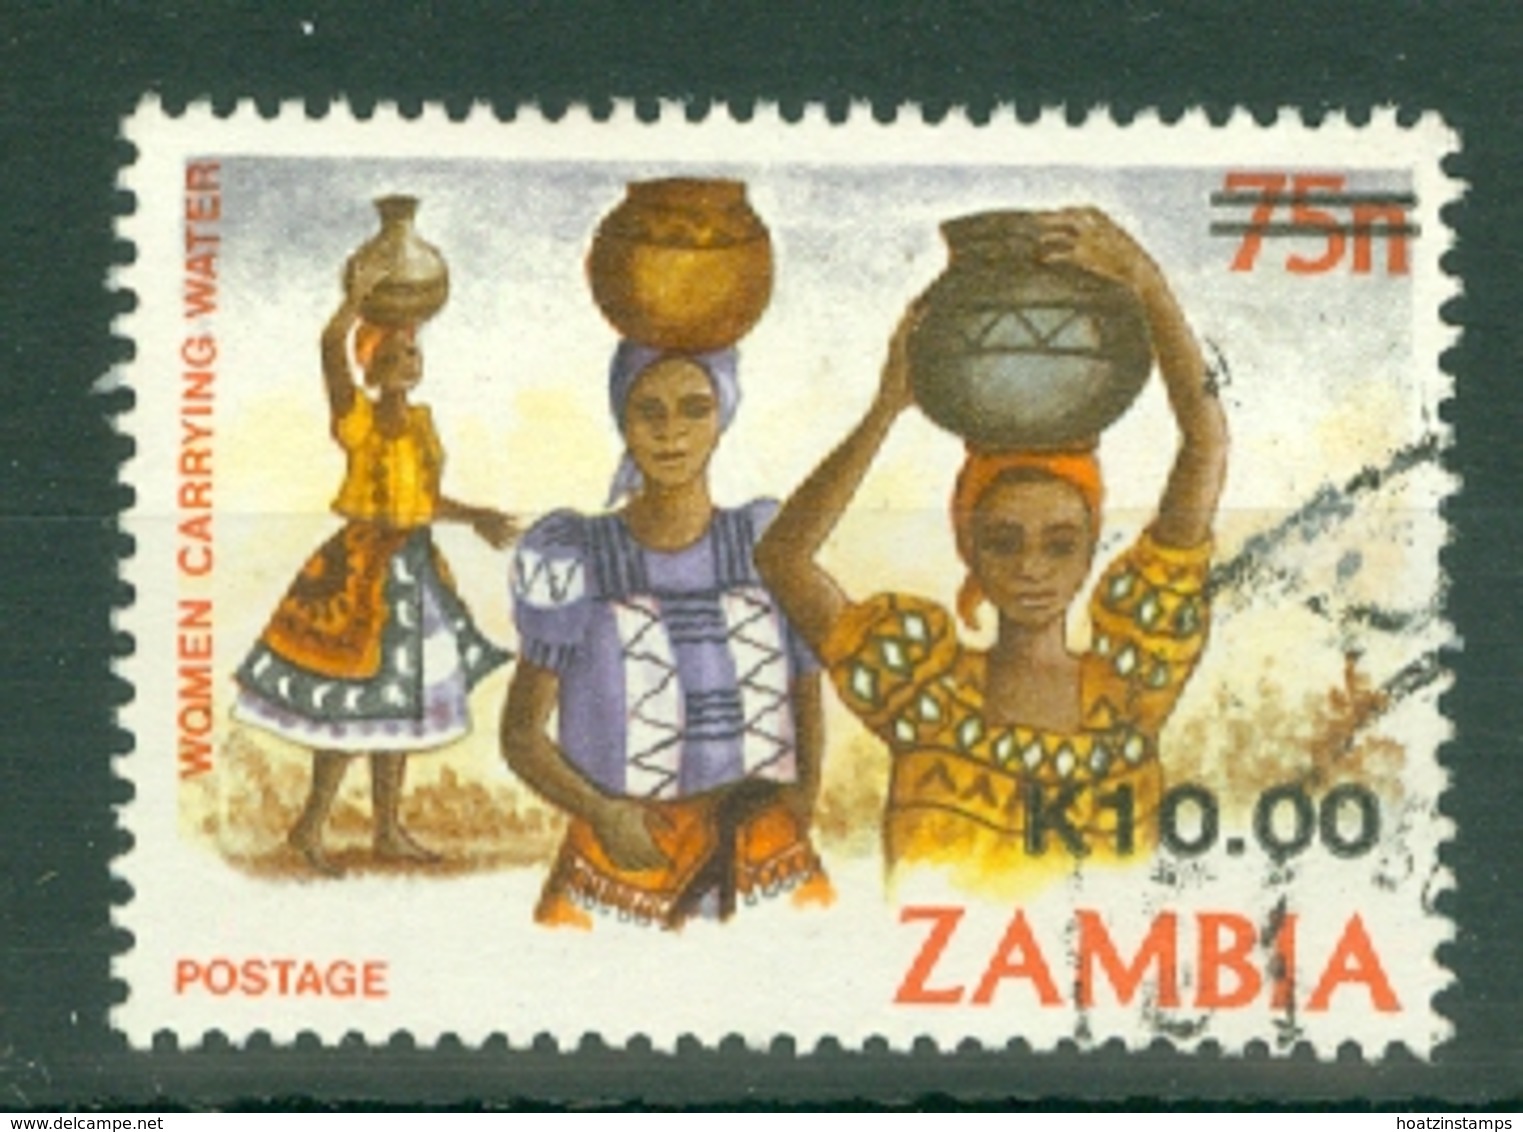 Zambia: 1989   Surcharge   SG583    K10 On 75n     Used - Zambie (1965-...)